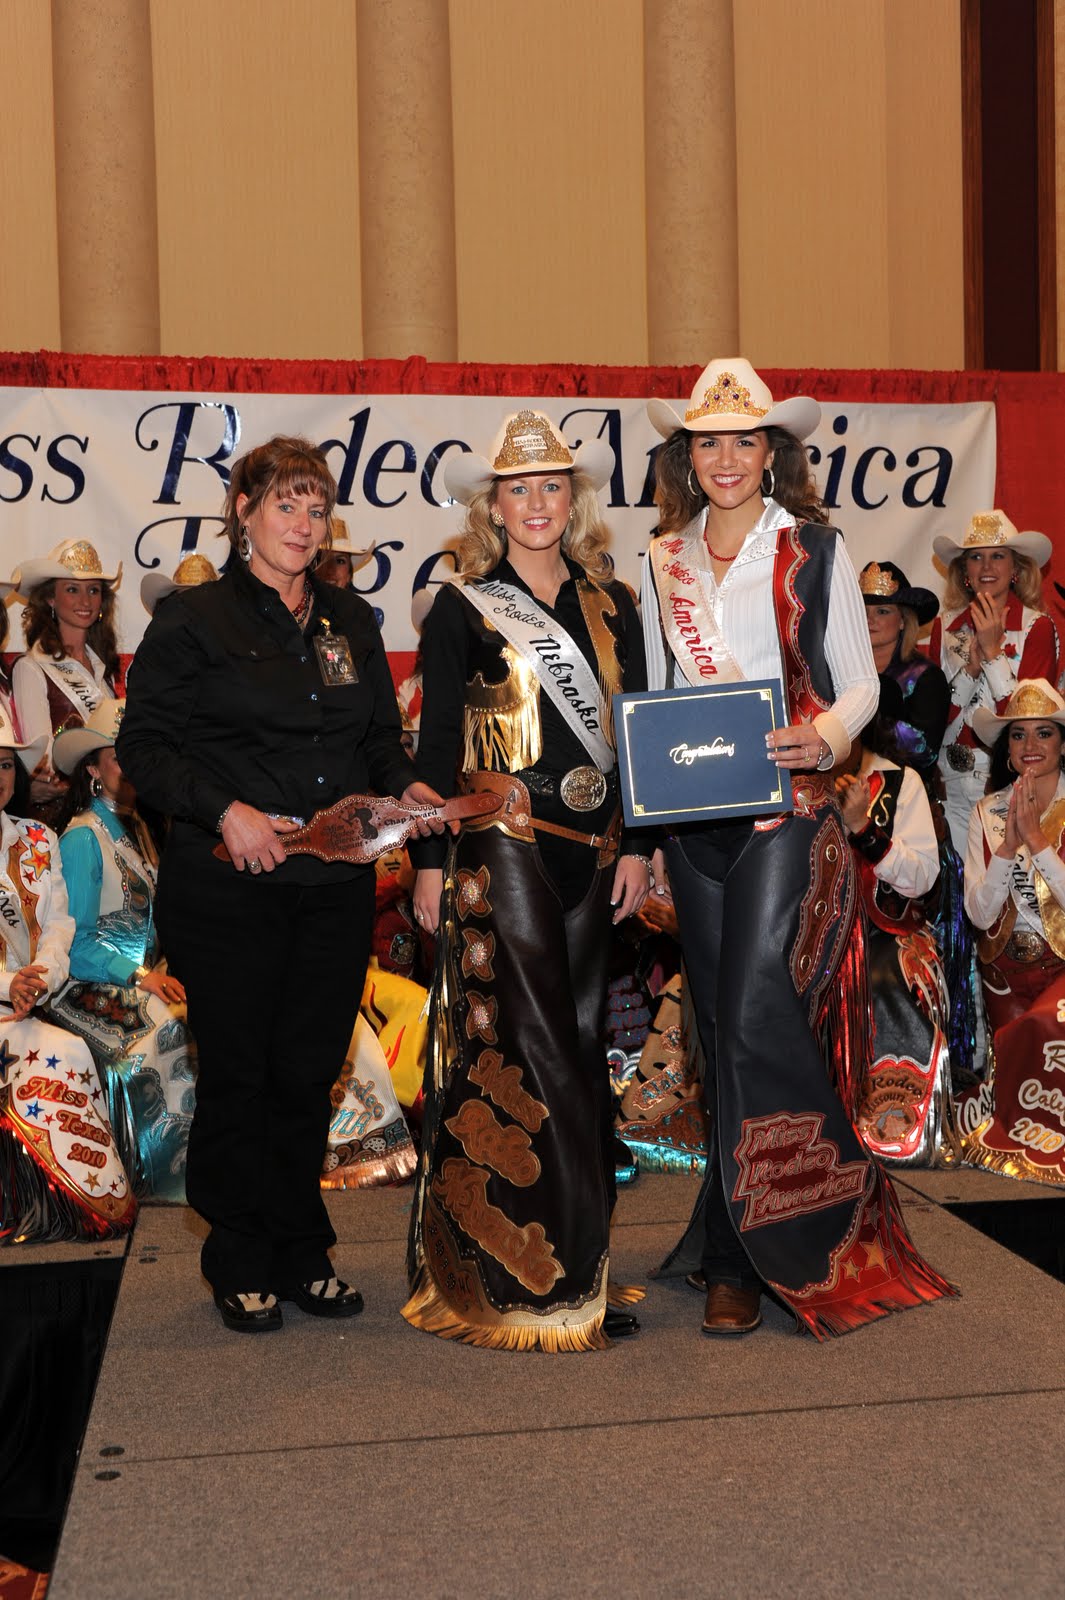 Miss Rodeo America Pageant